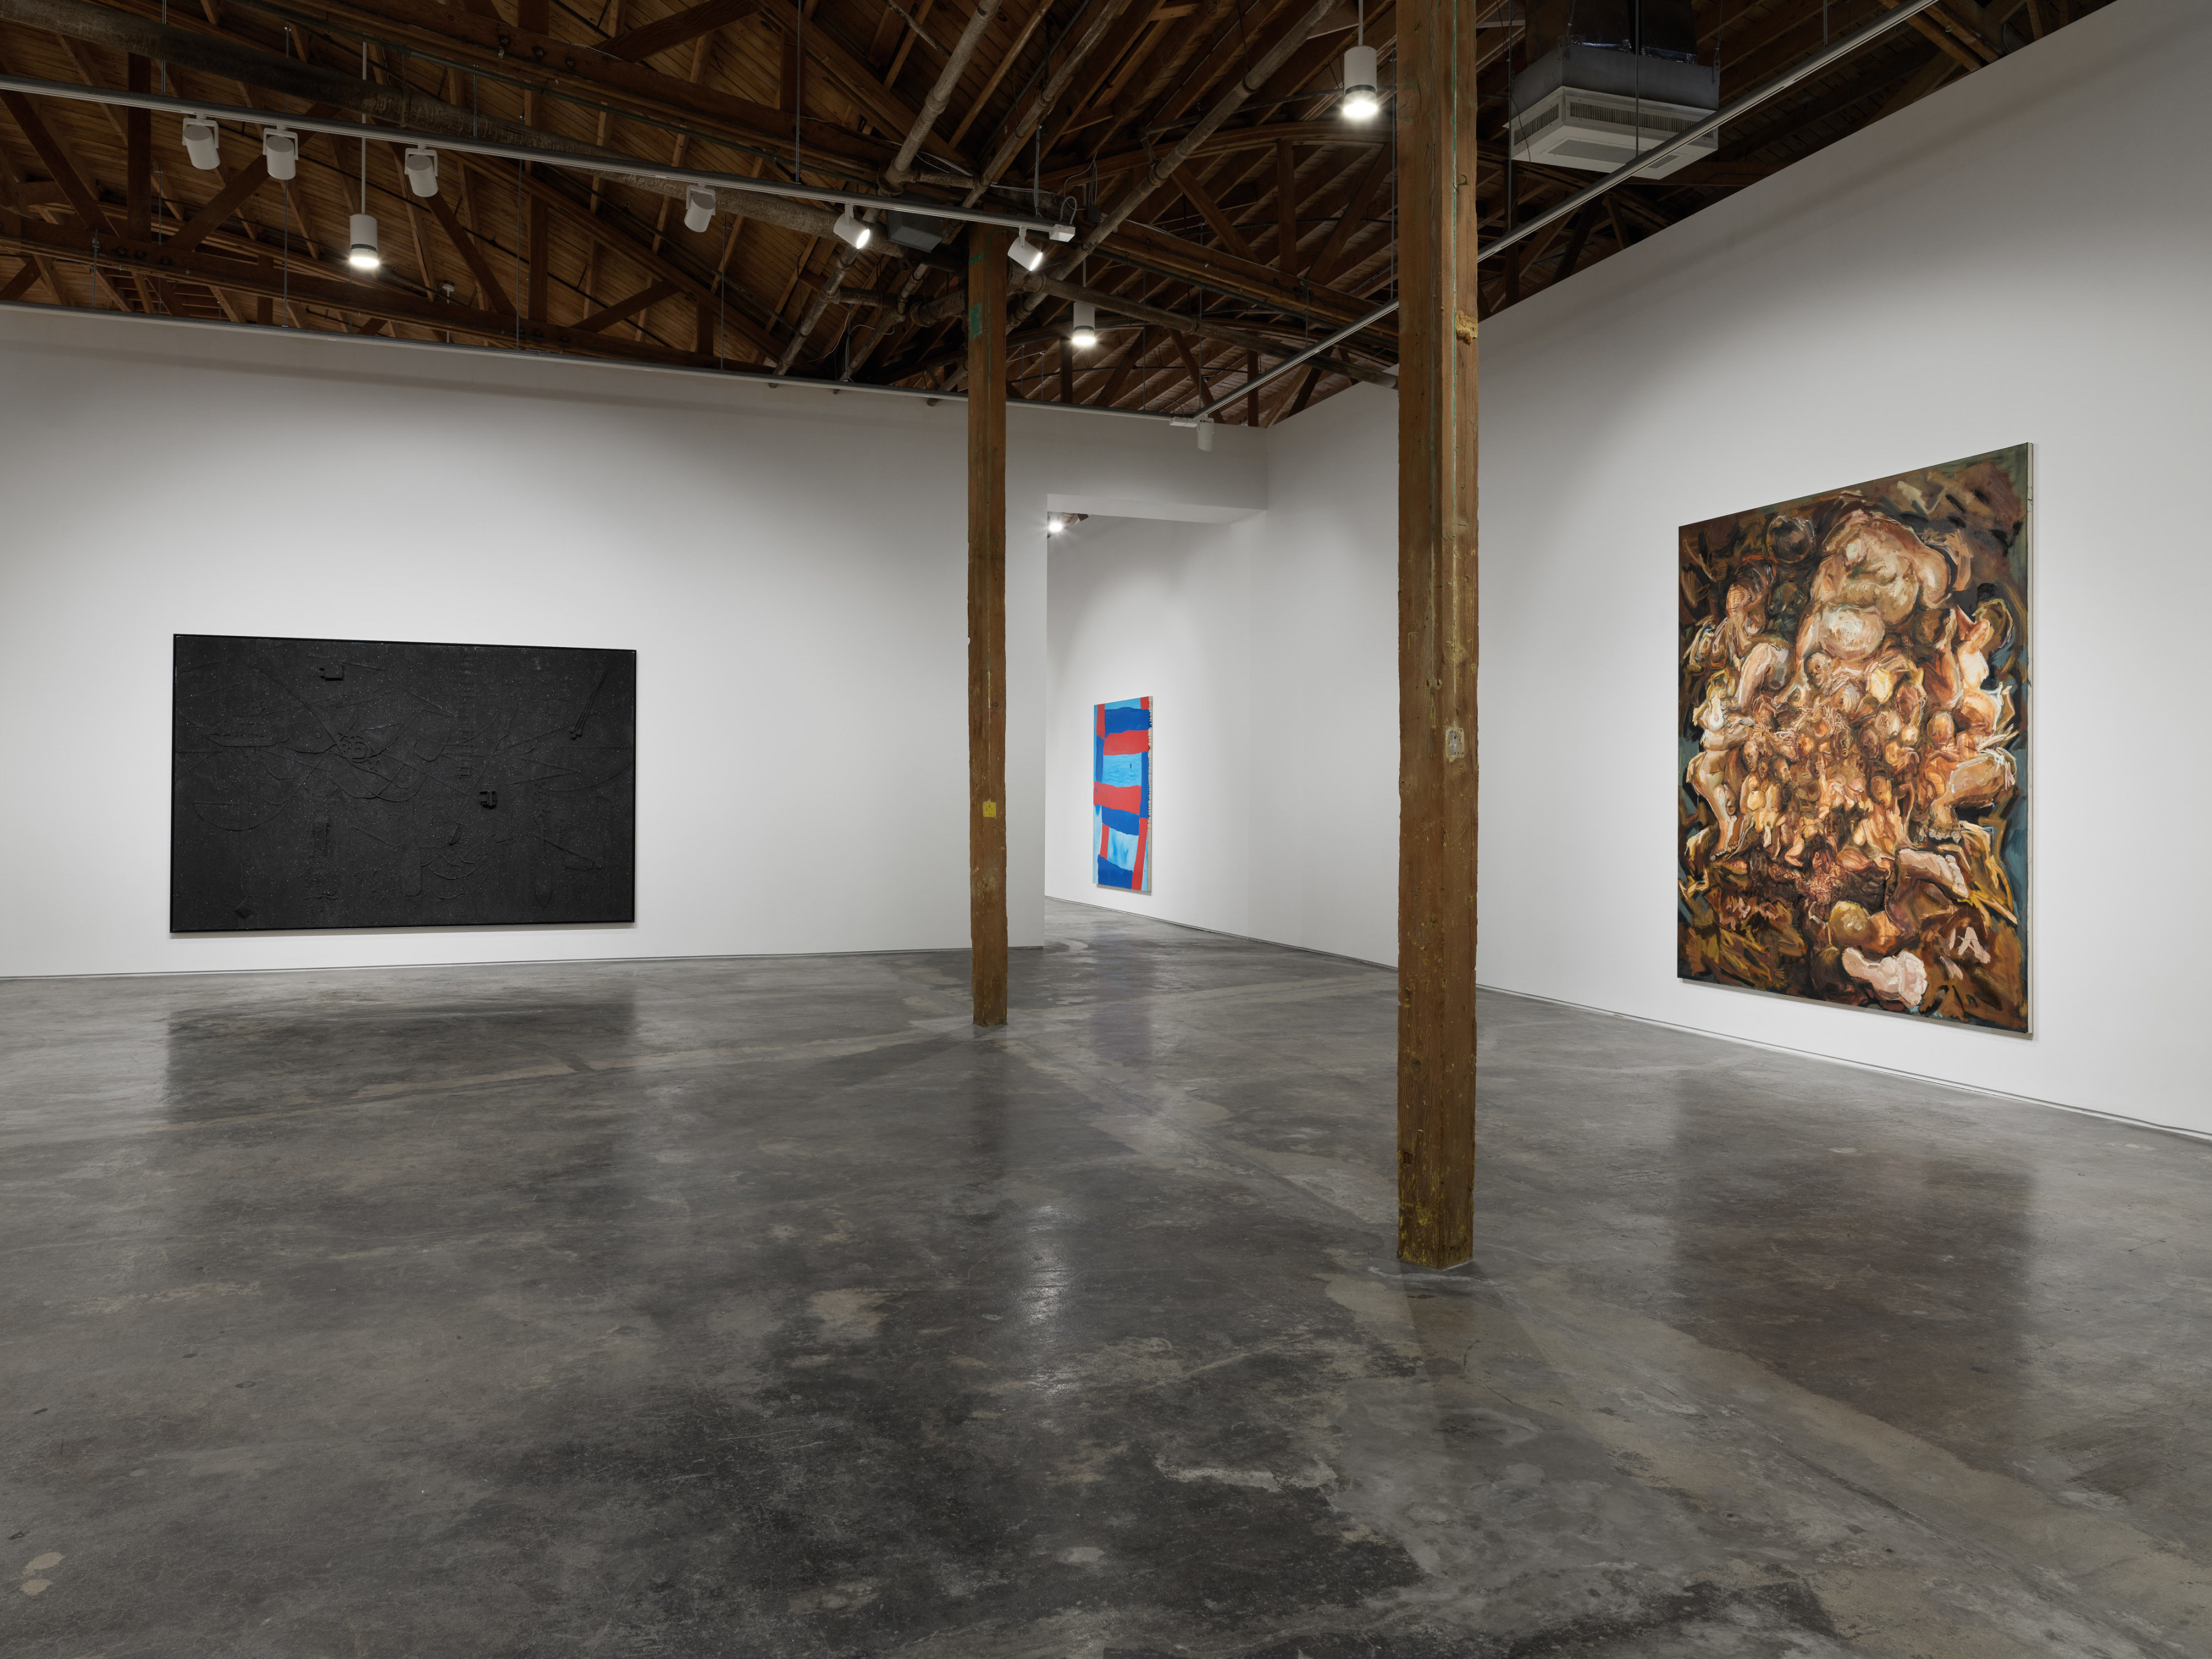 Installation view of the exhibition "The Big Picture" at Night Gallery, including a large scale painting by Radcliffe Bailey, Hasani Sahlahe, and Marcia Falcao. 